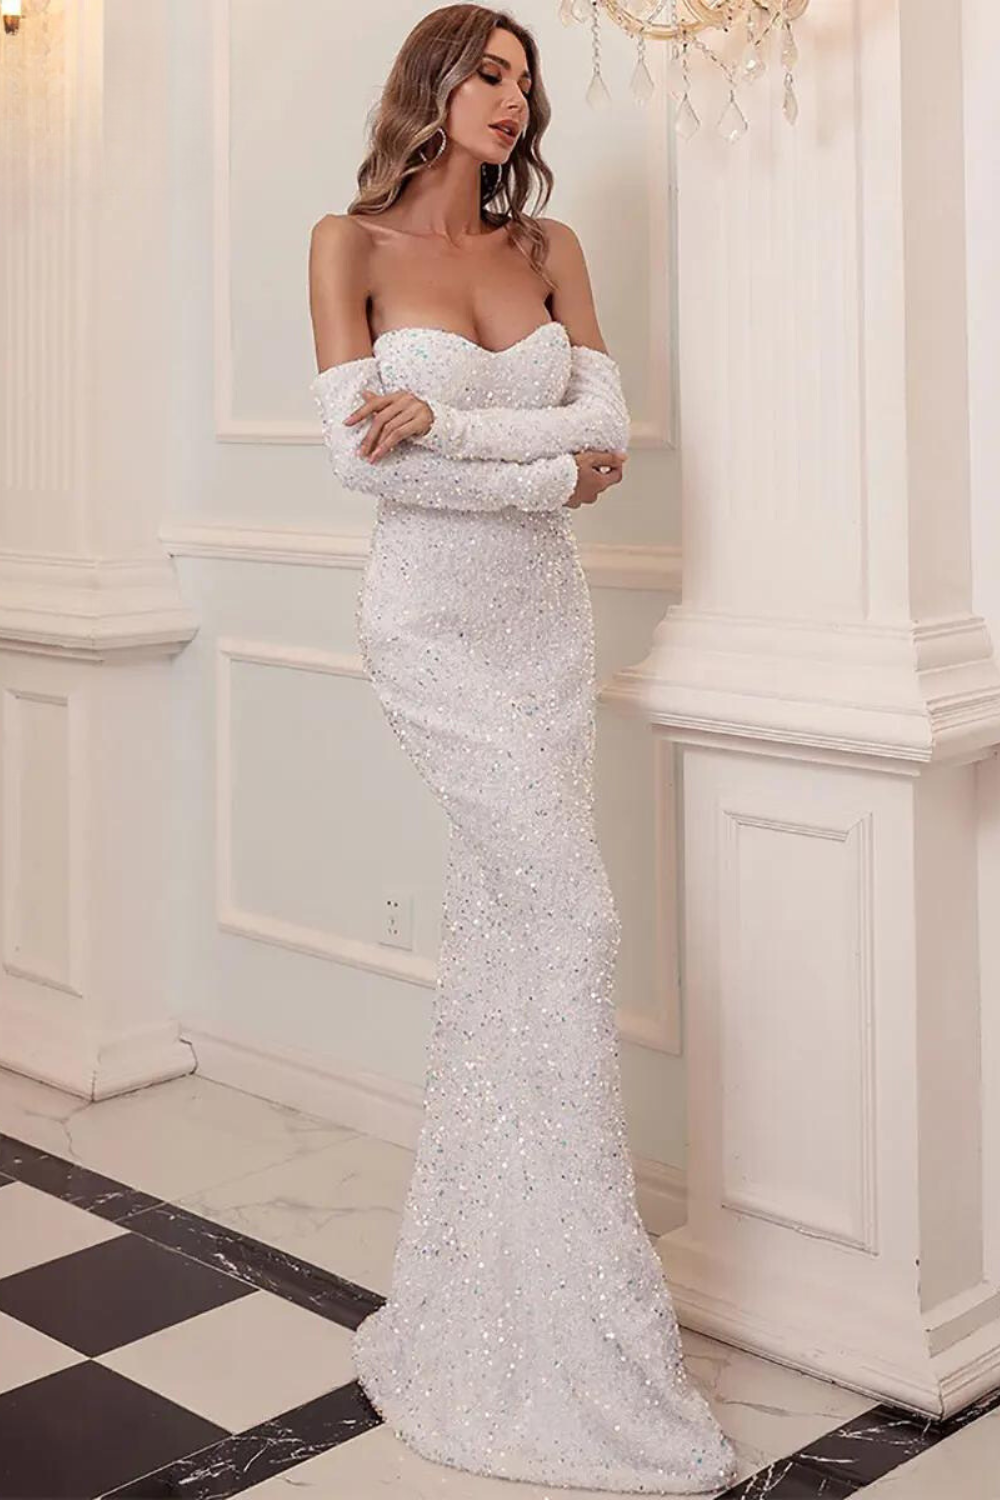 Elegant Off-the-Shoulder Sequined Gown -Women’s Long Sleeve Bodycon Evening,Wedding, Prom  Dress